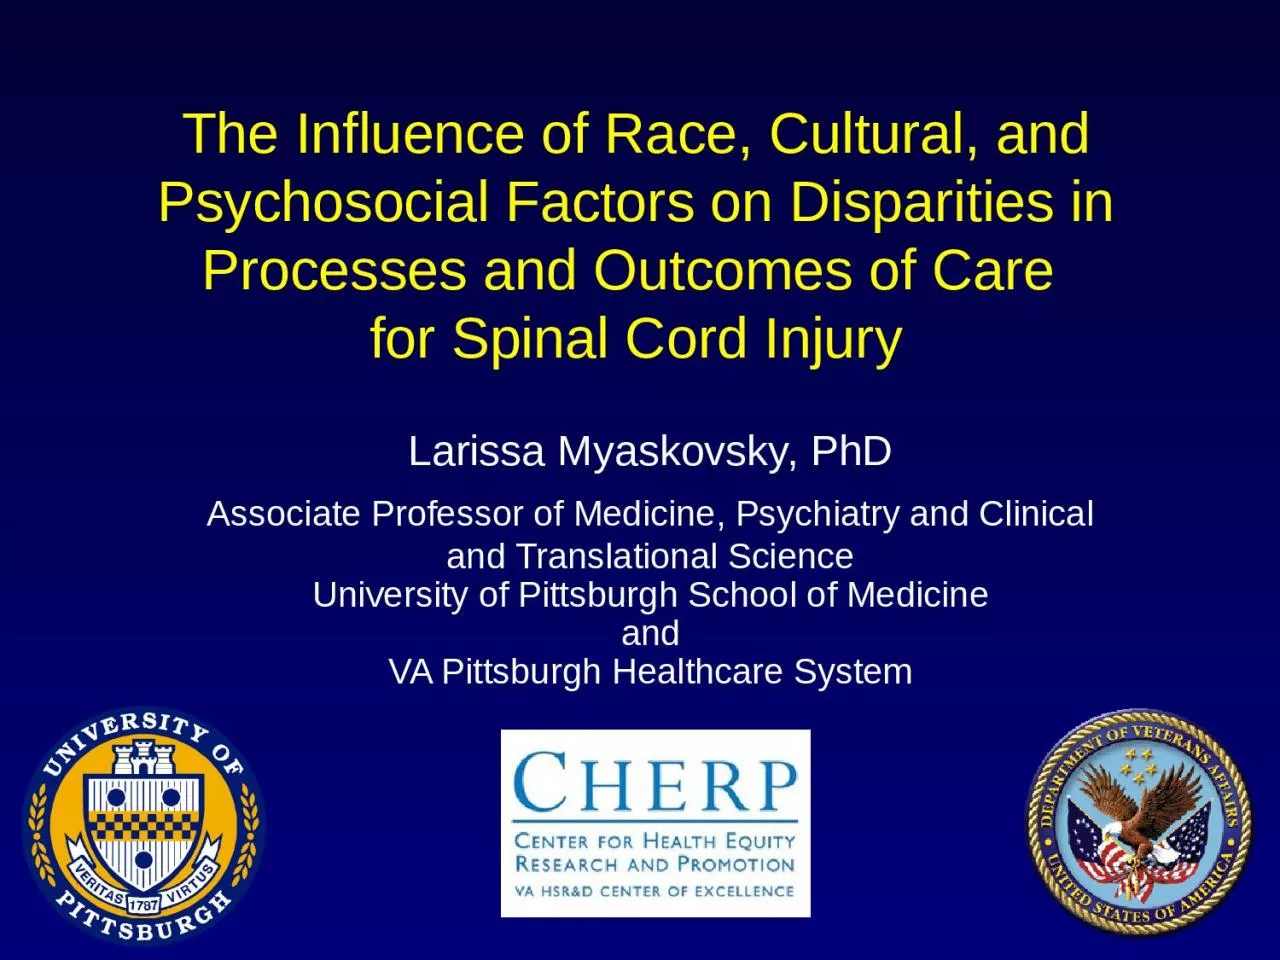 The Influence of Race, Cultural, and Psychosocial Factors on Disparities in Processes